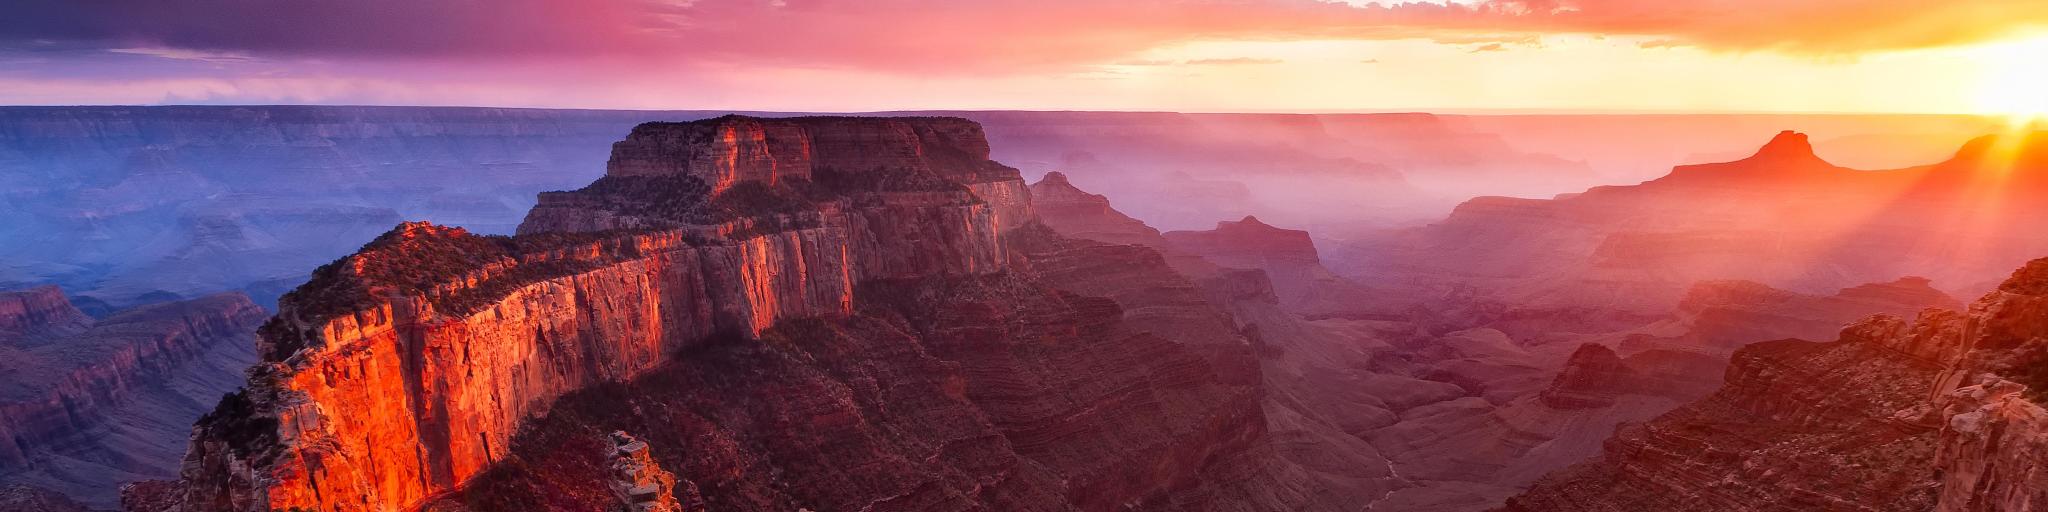 The Grand Canyon, USA taken at sunset with a dramatic sky off reds and yellows casting shadows on the epic rock formations in the foreground and the valley below.